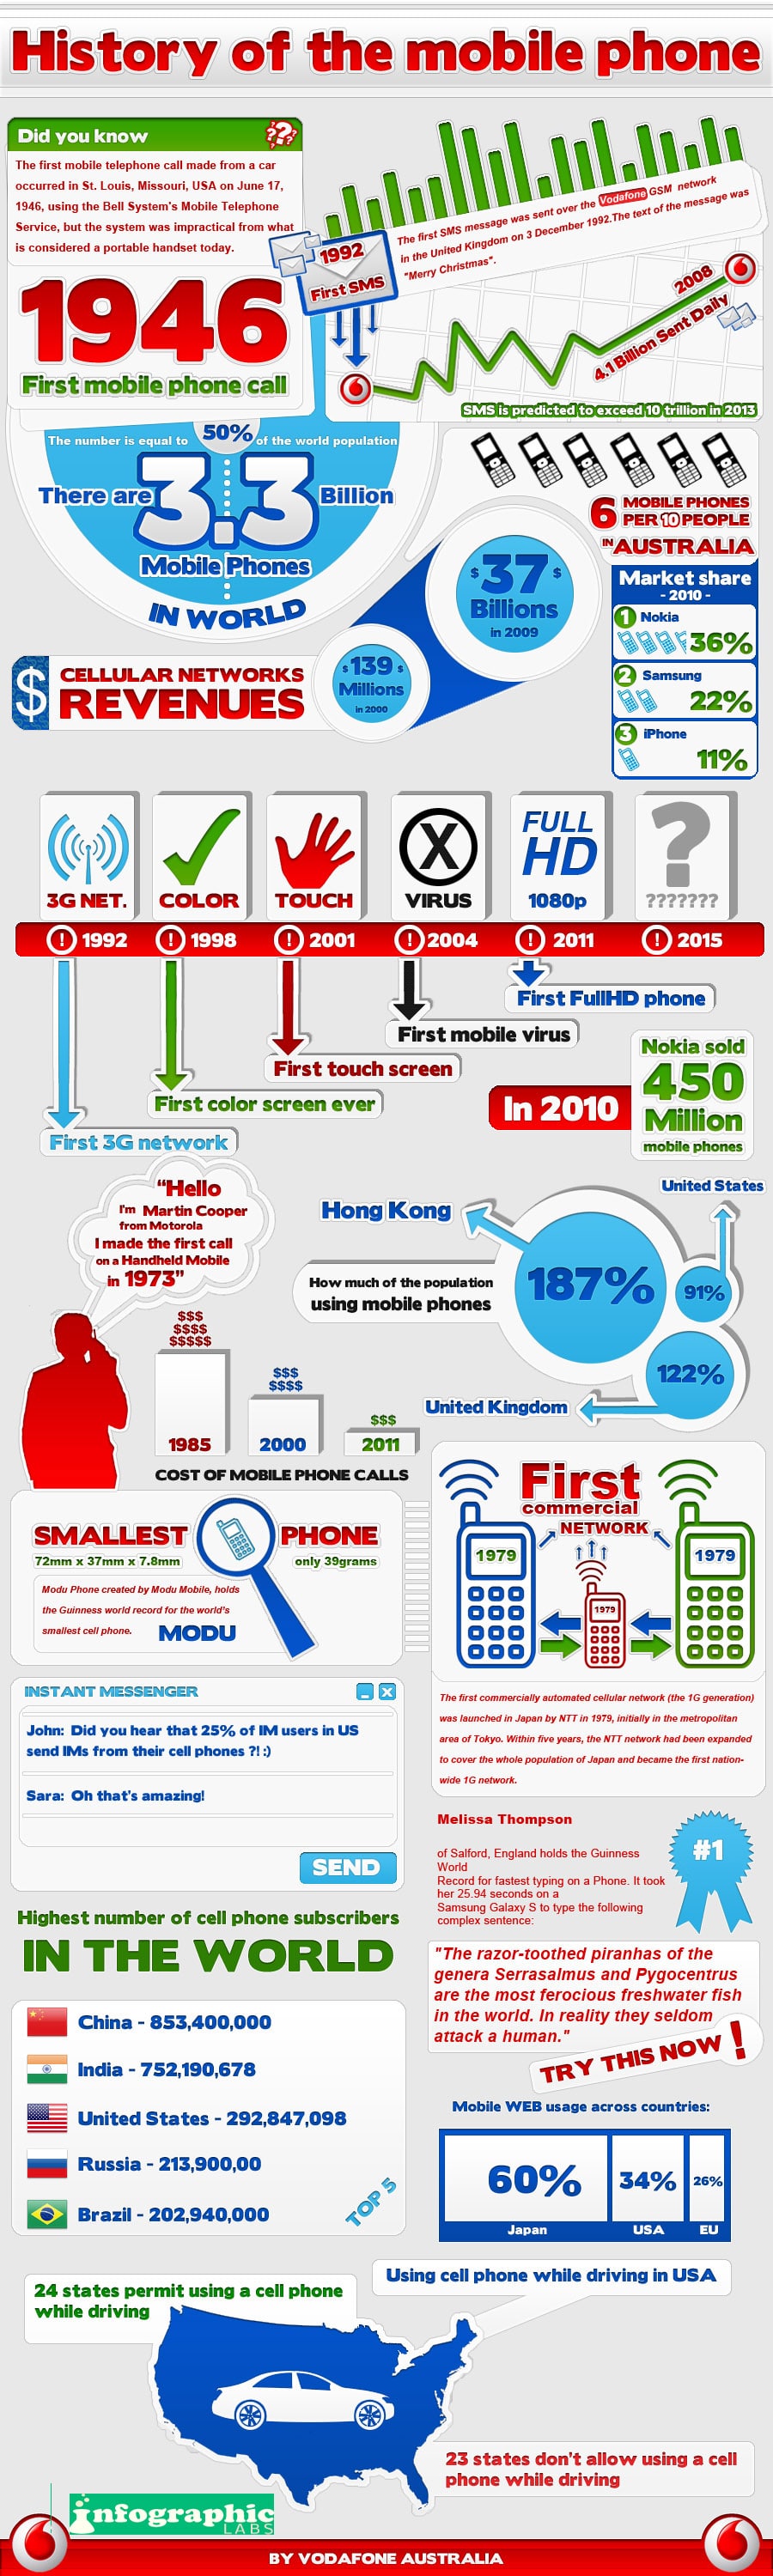 Mobile Phone History: All The Firsts [Infographic]